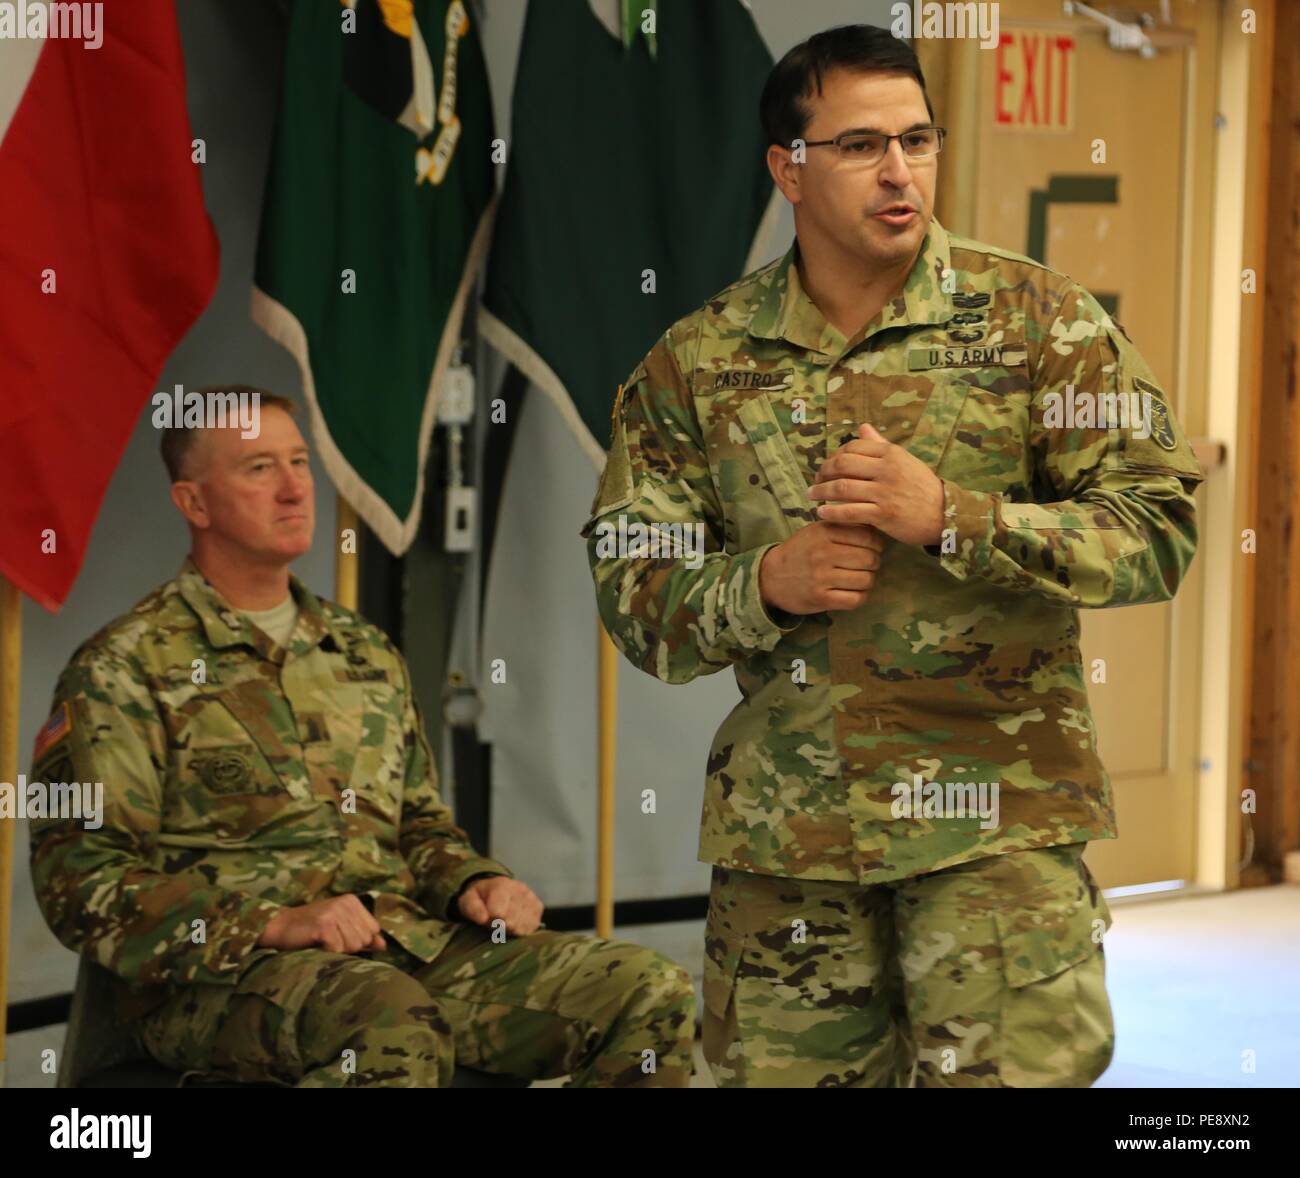 The 5th Battalion, 1st Special Warfare Training Group (Airborne) Command team, Lt. Col. Daniel Castro and Command Sgt. Maj. Jody Hall speak to the graduates of the POQC during the commencement ceremony. Stock Photo